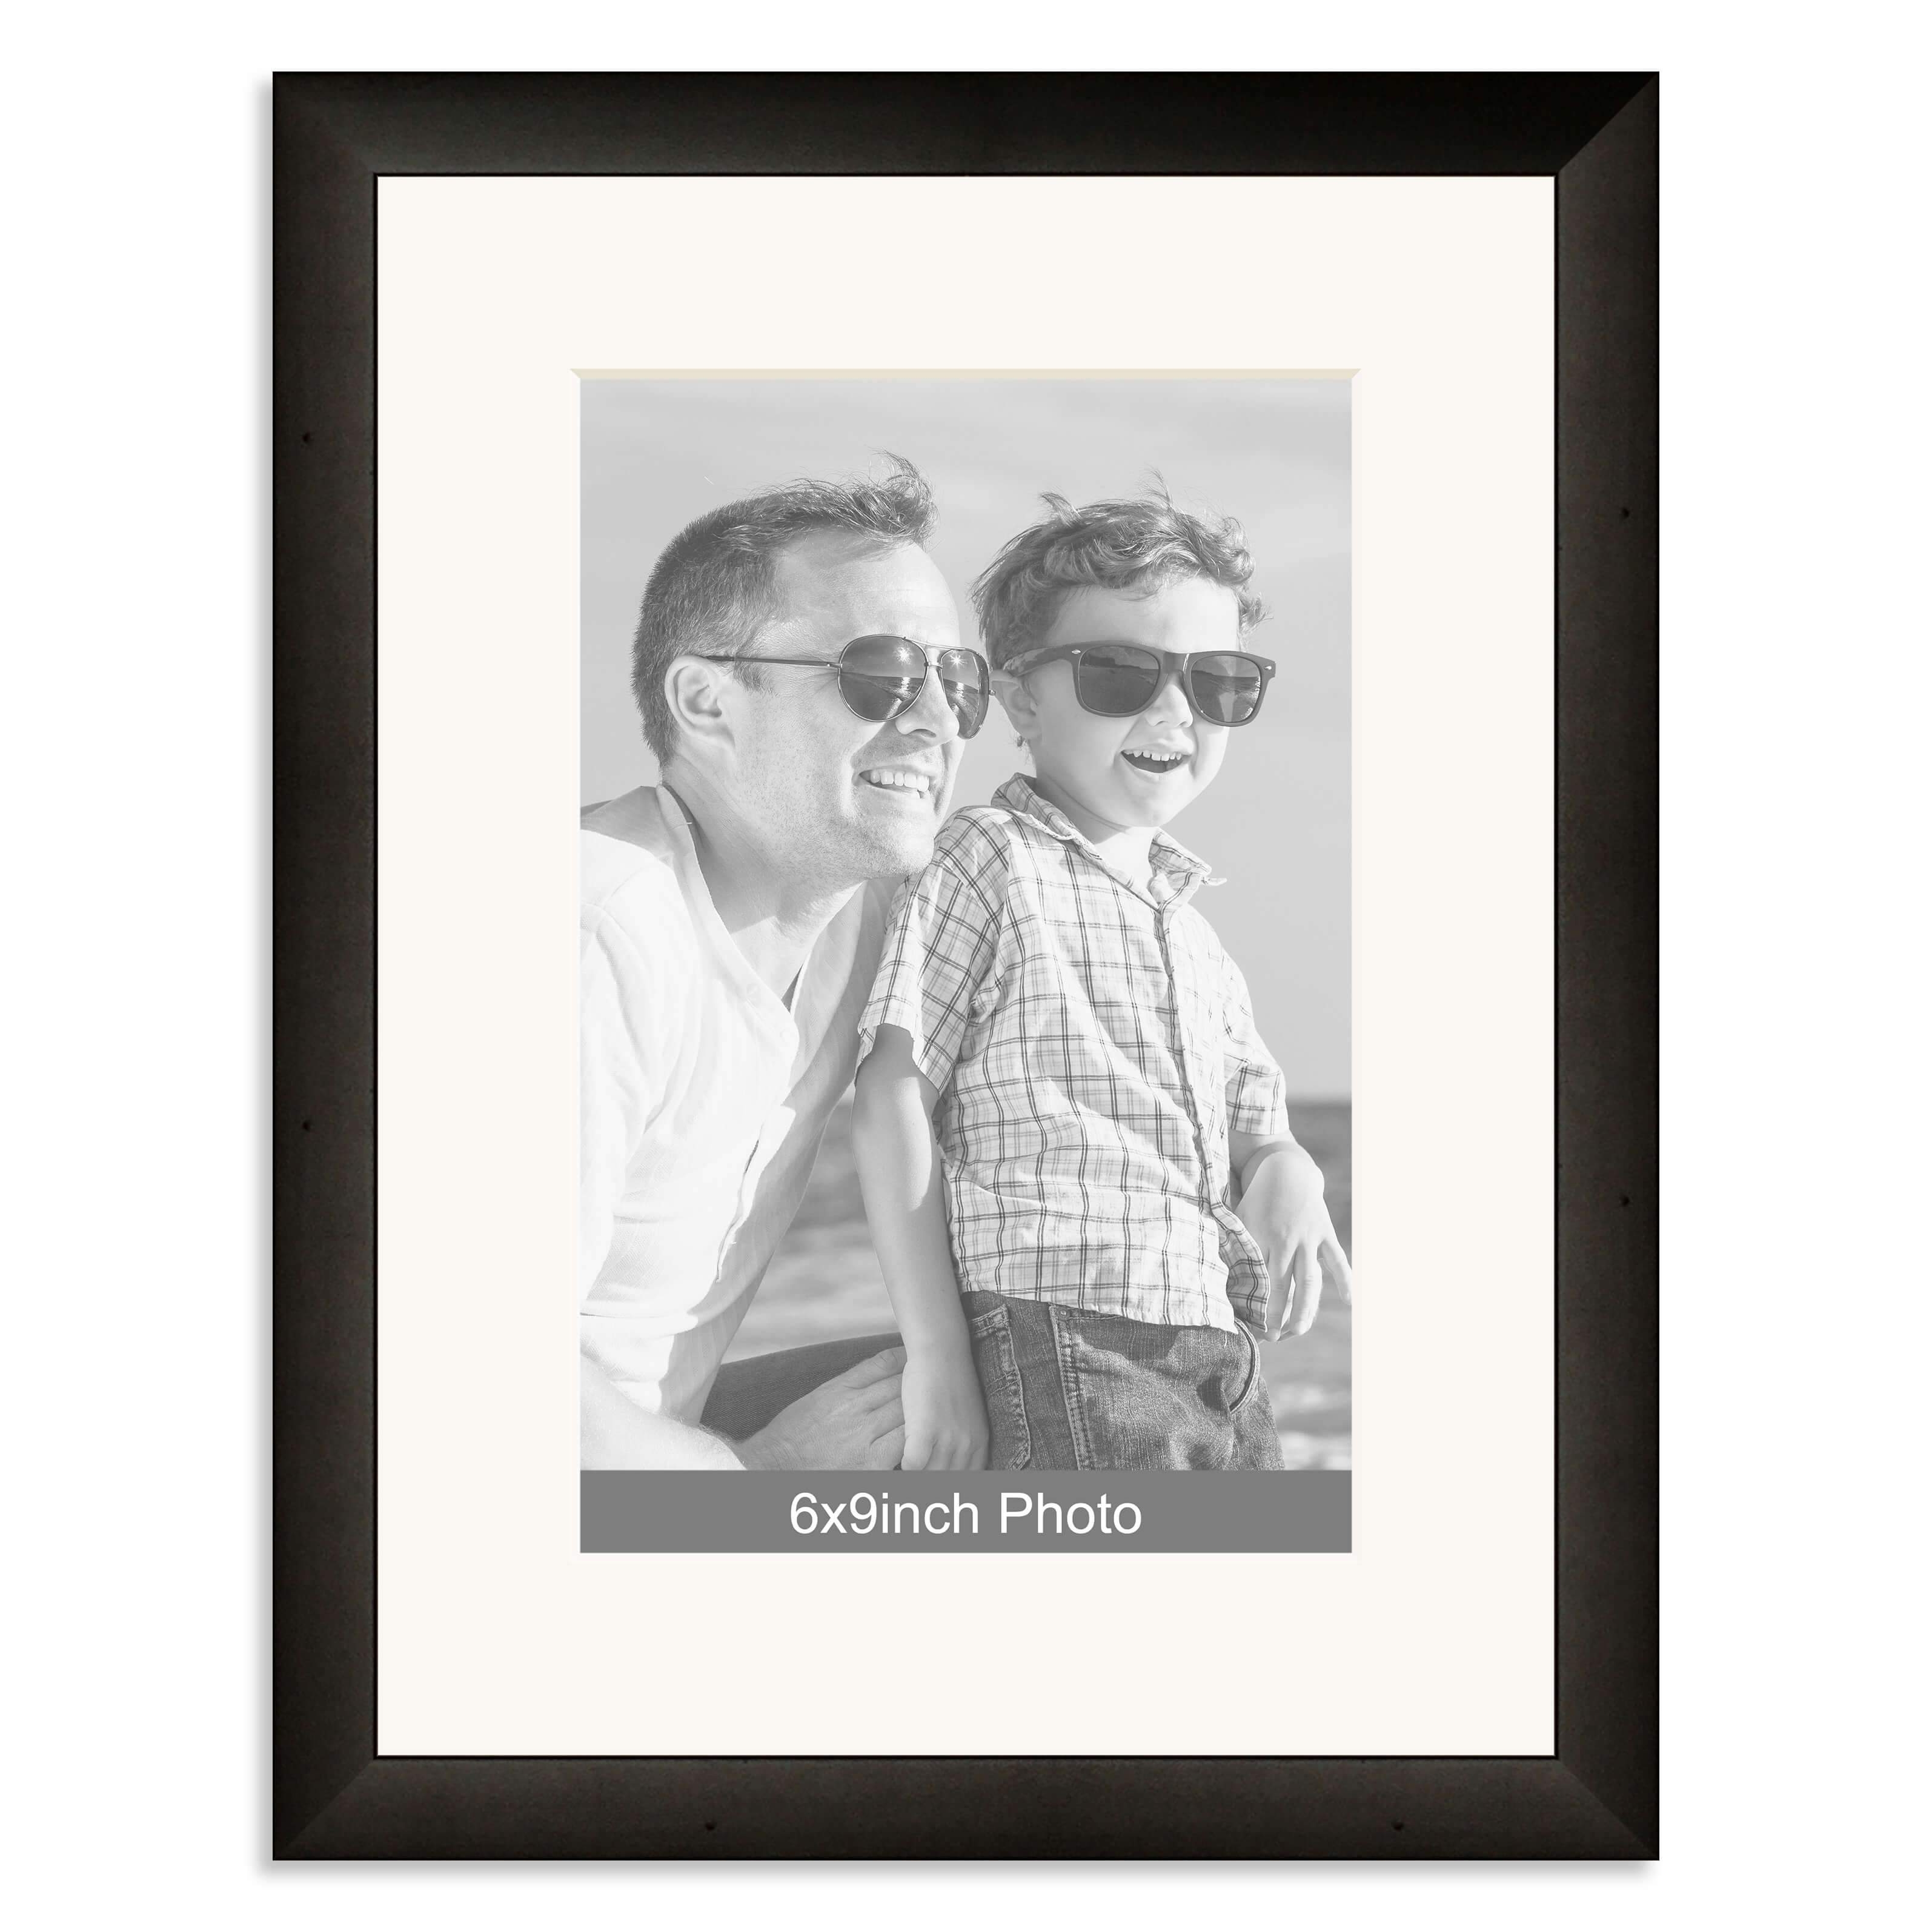 Black Wooden Photo Frame with mount for a 9×6/6x9in Photo